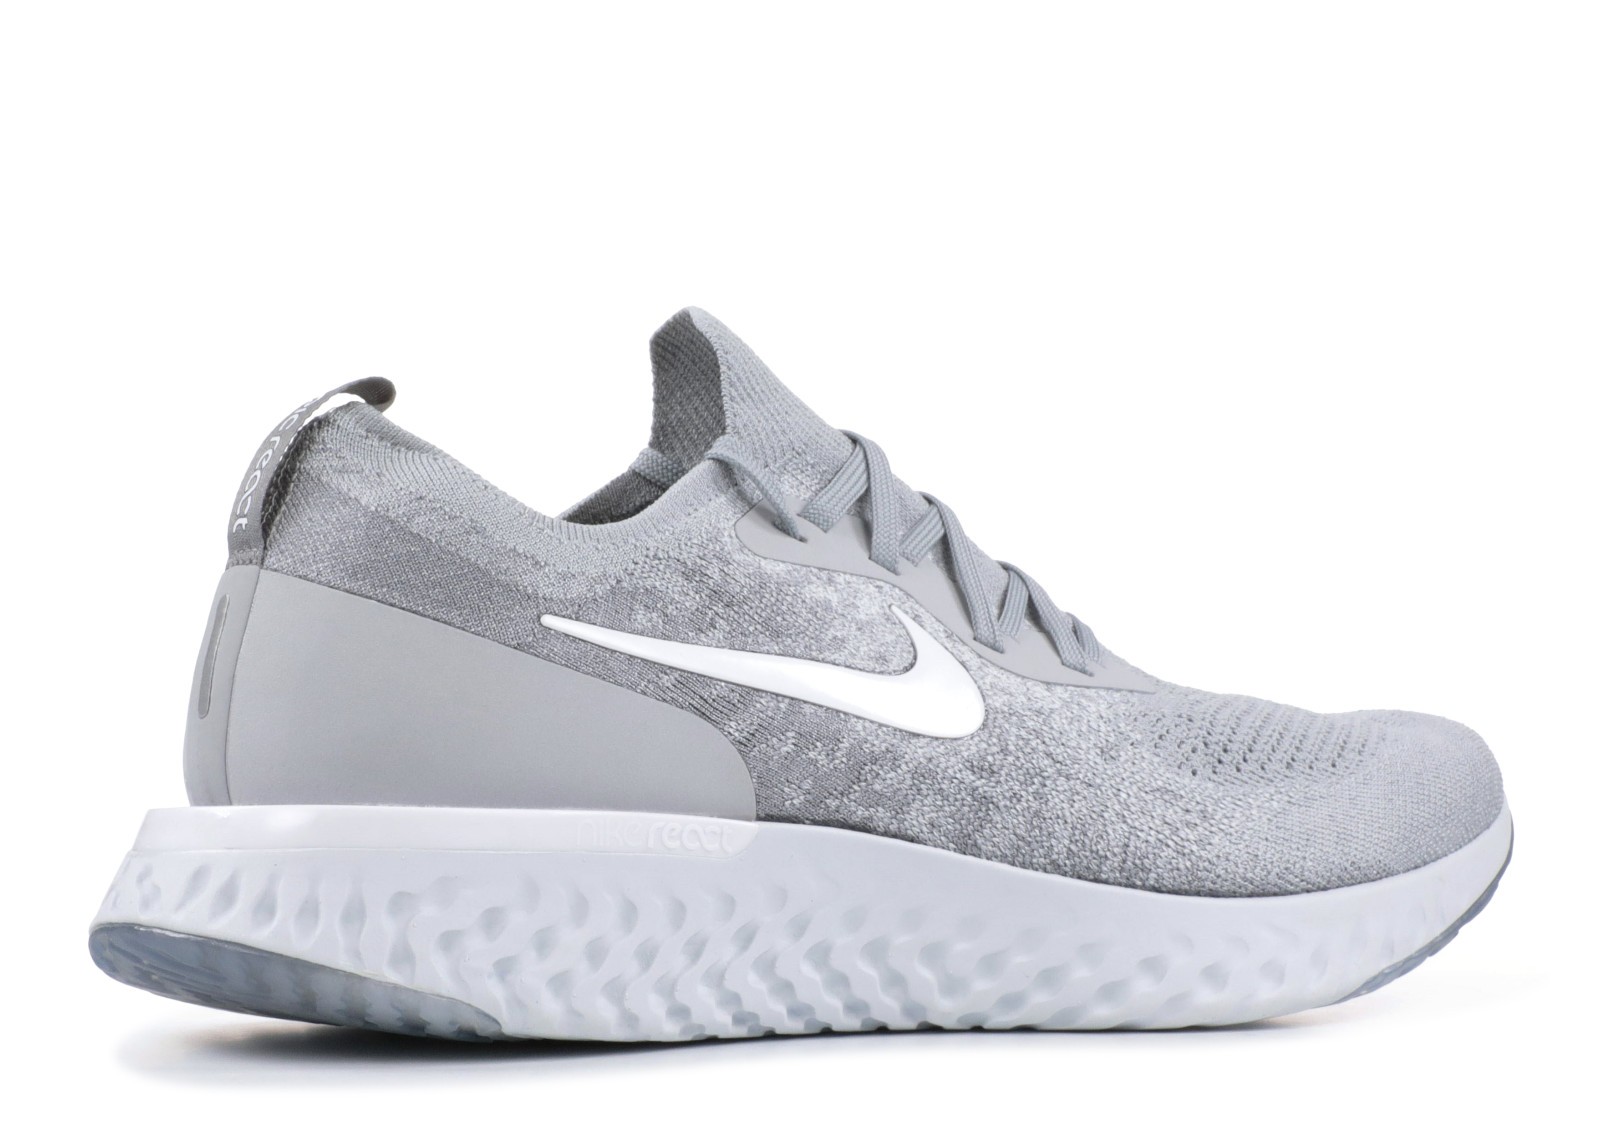 vagón tuberculosis Calibre 002 - GmarShops - Nike Epic React Flyknit work White Wolf Grey Cool AQ0067  - mens nike shoes zoom air on sale today price list